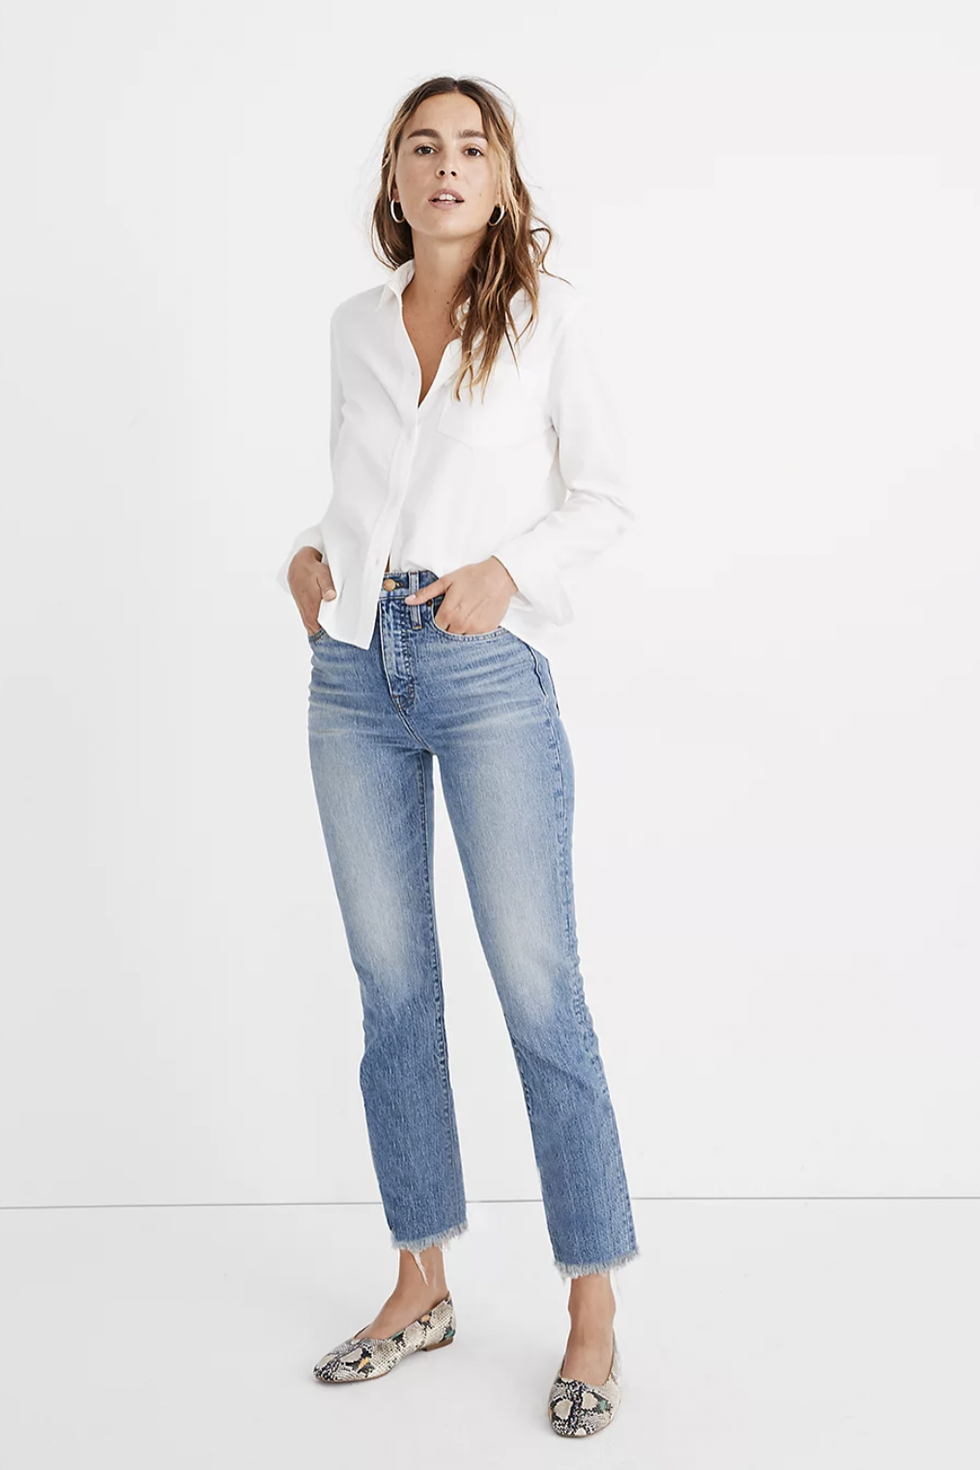 Top 30 Latest High Waisted Jeans for Women (2022): Denim Looks  White high  waisted jeans, High waisted black jeans, Women jeans